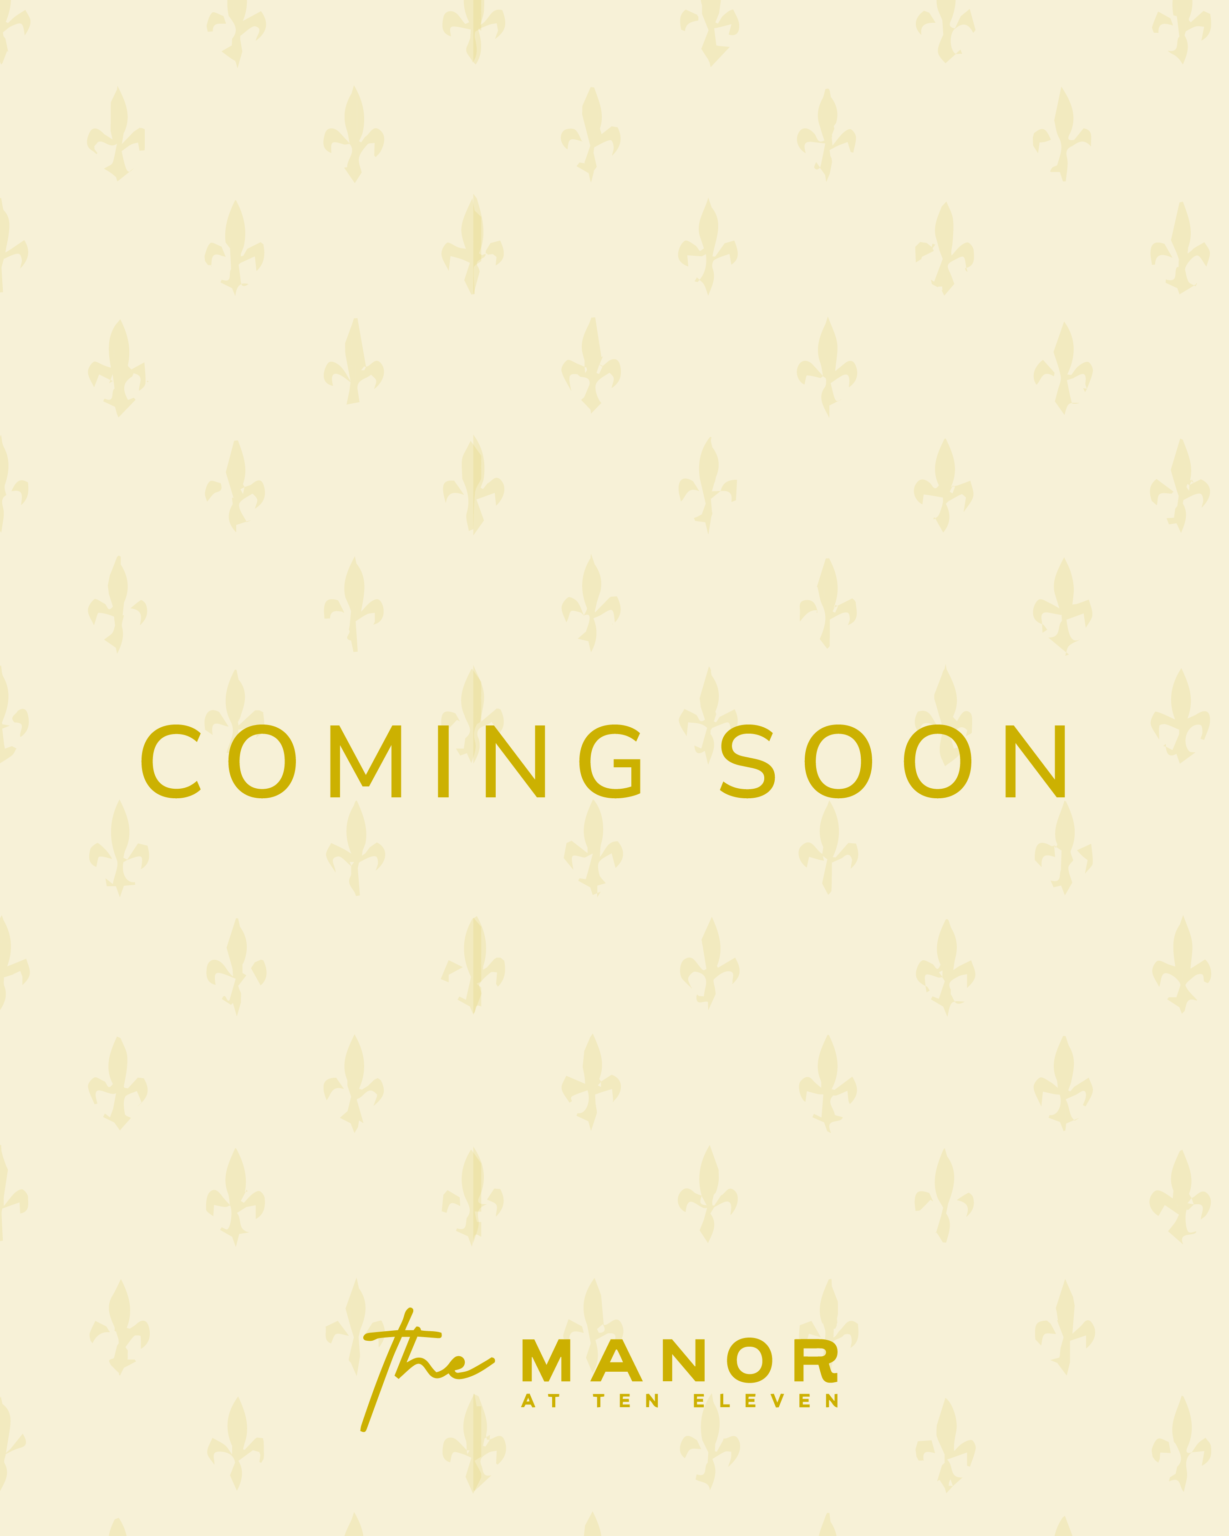 New Events Coming Soon At The Manor At Ten Eleven